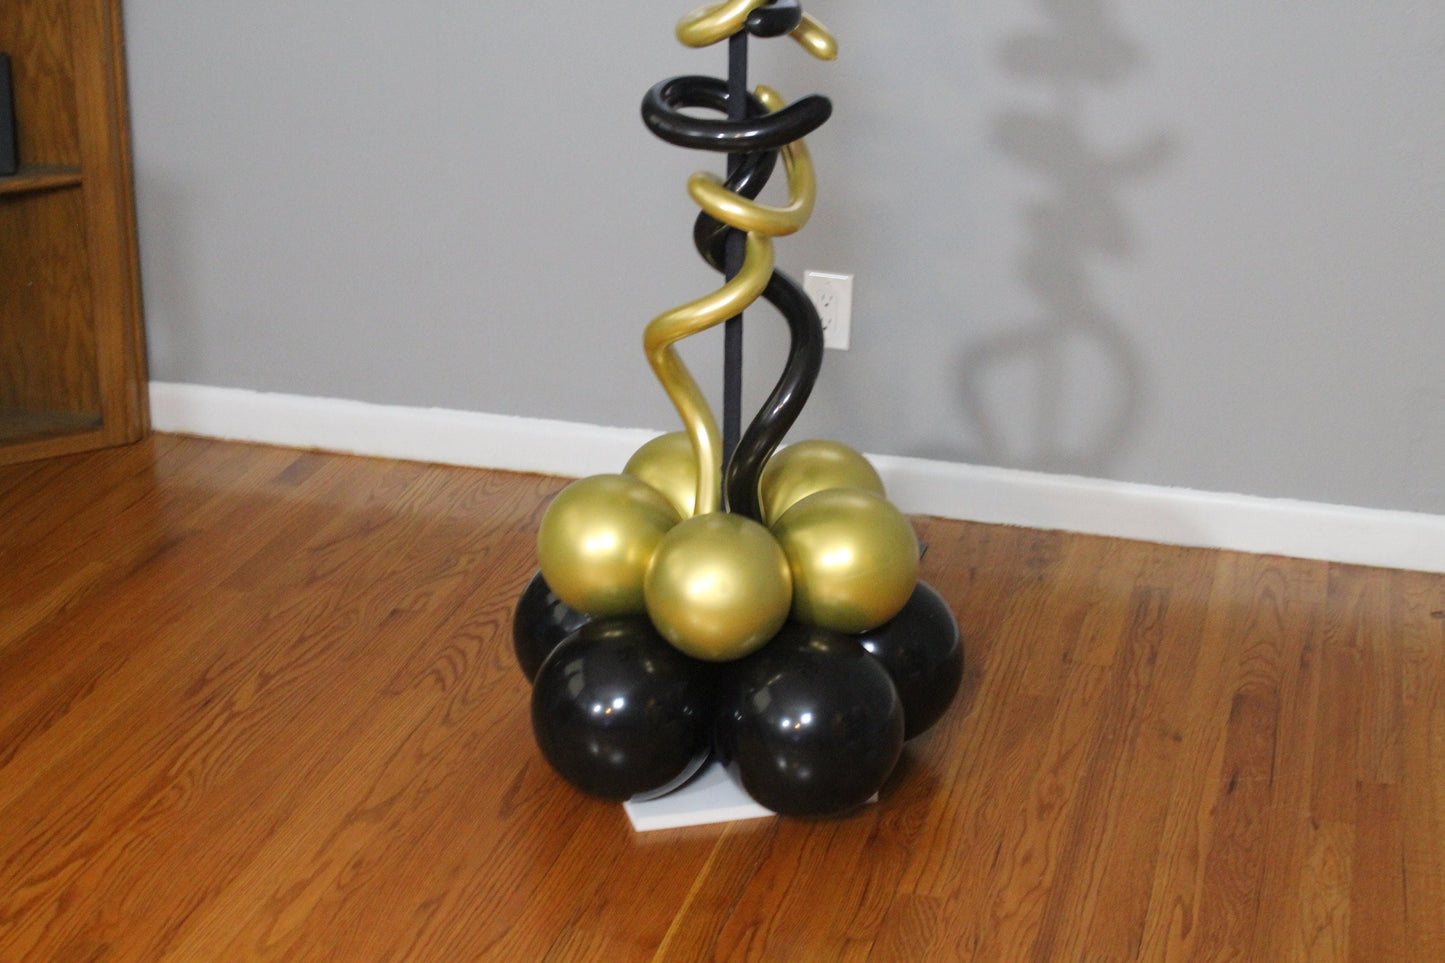 Balloon Stand Tutorial and Plans | Digital Plans for a Balloon Base